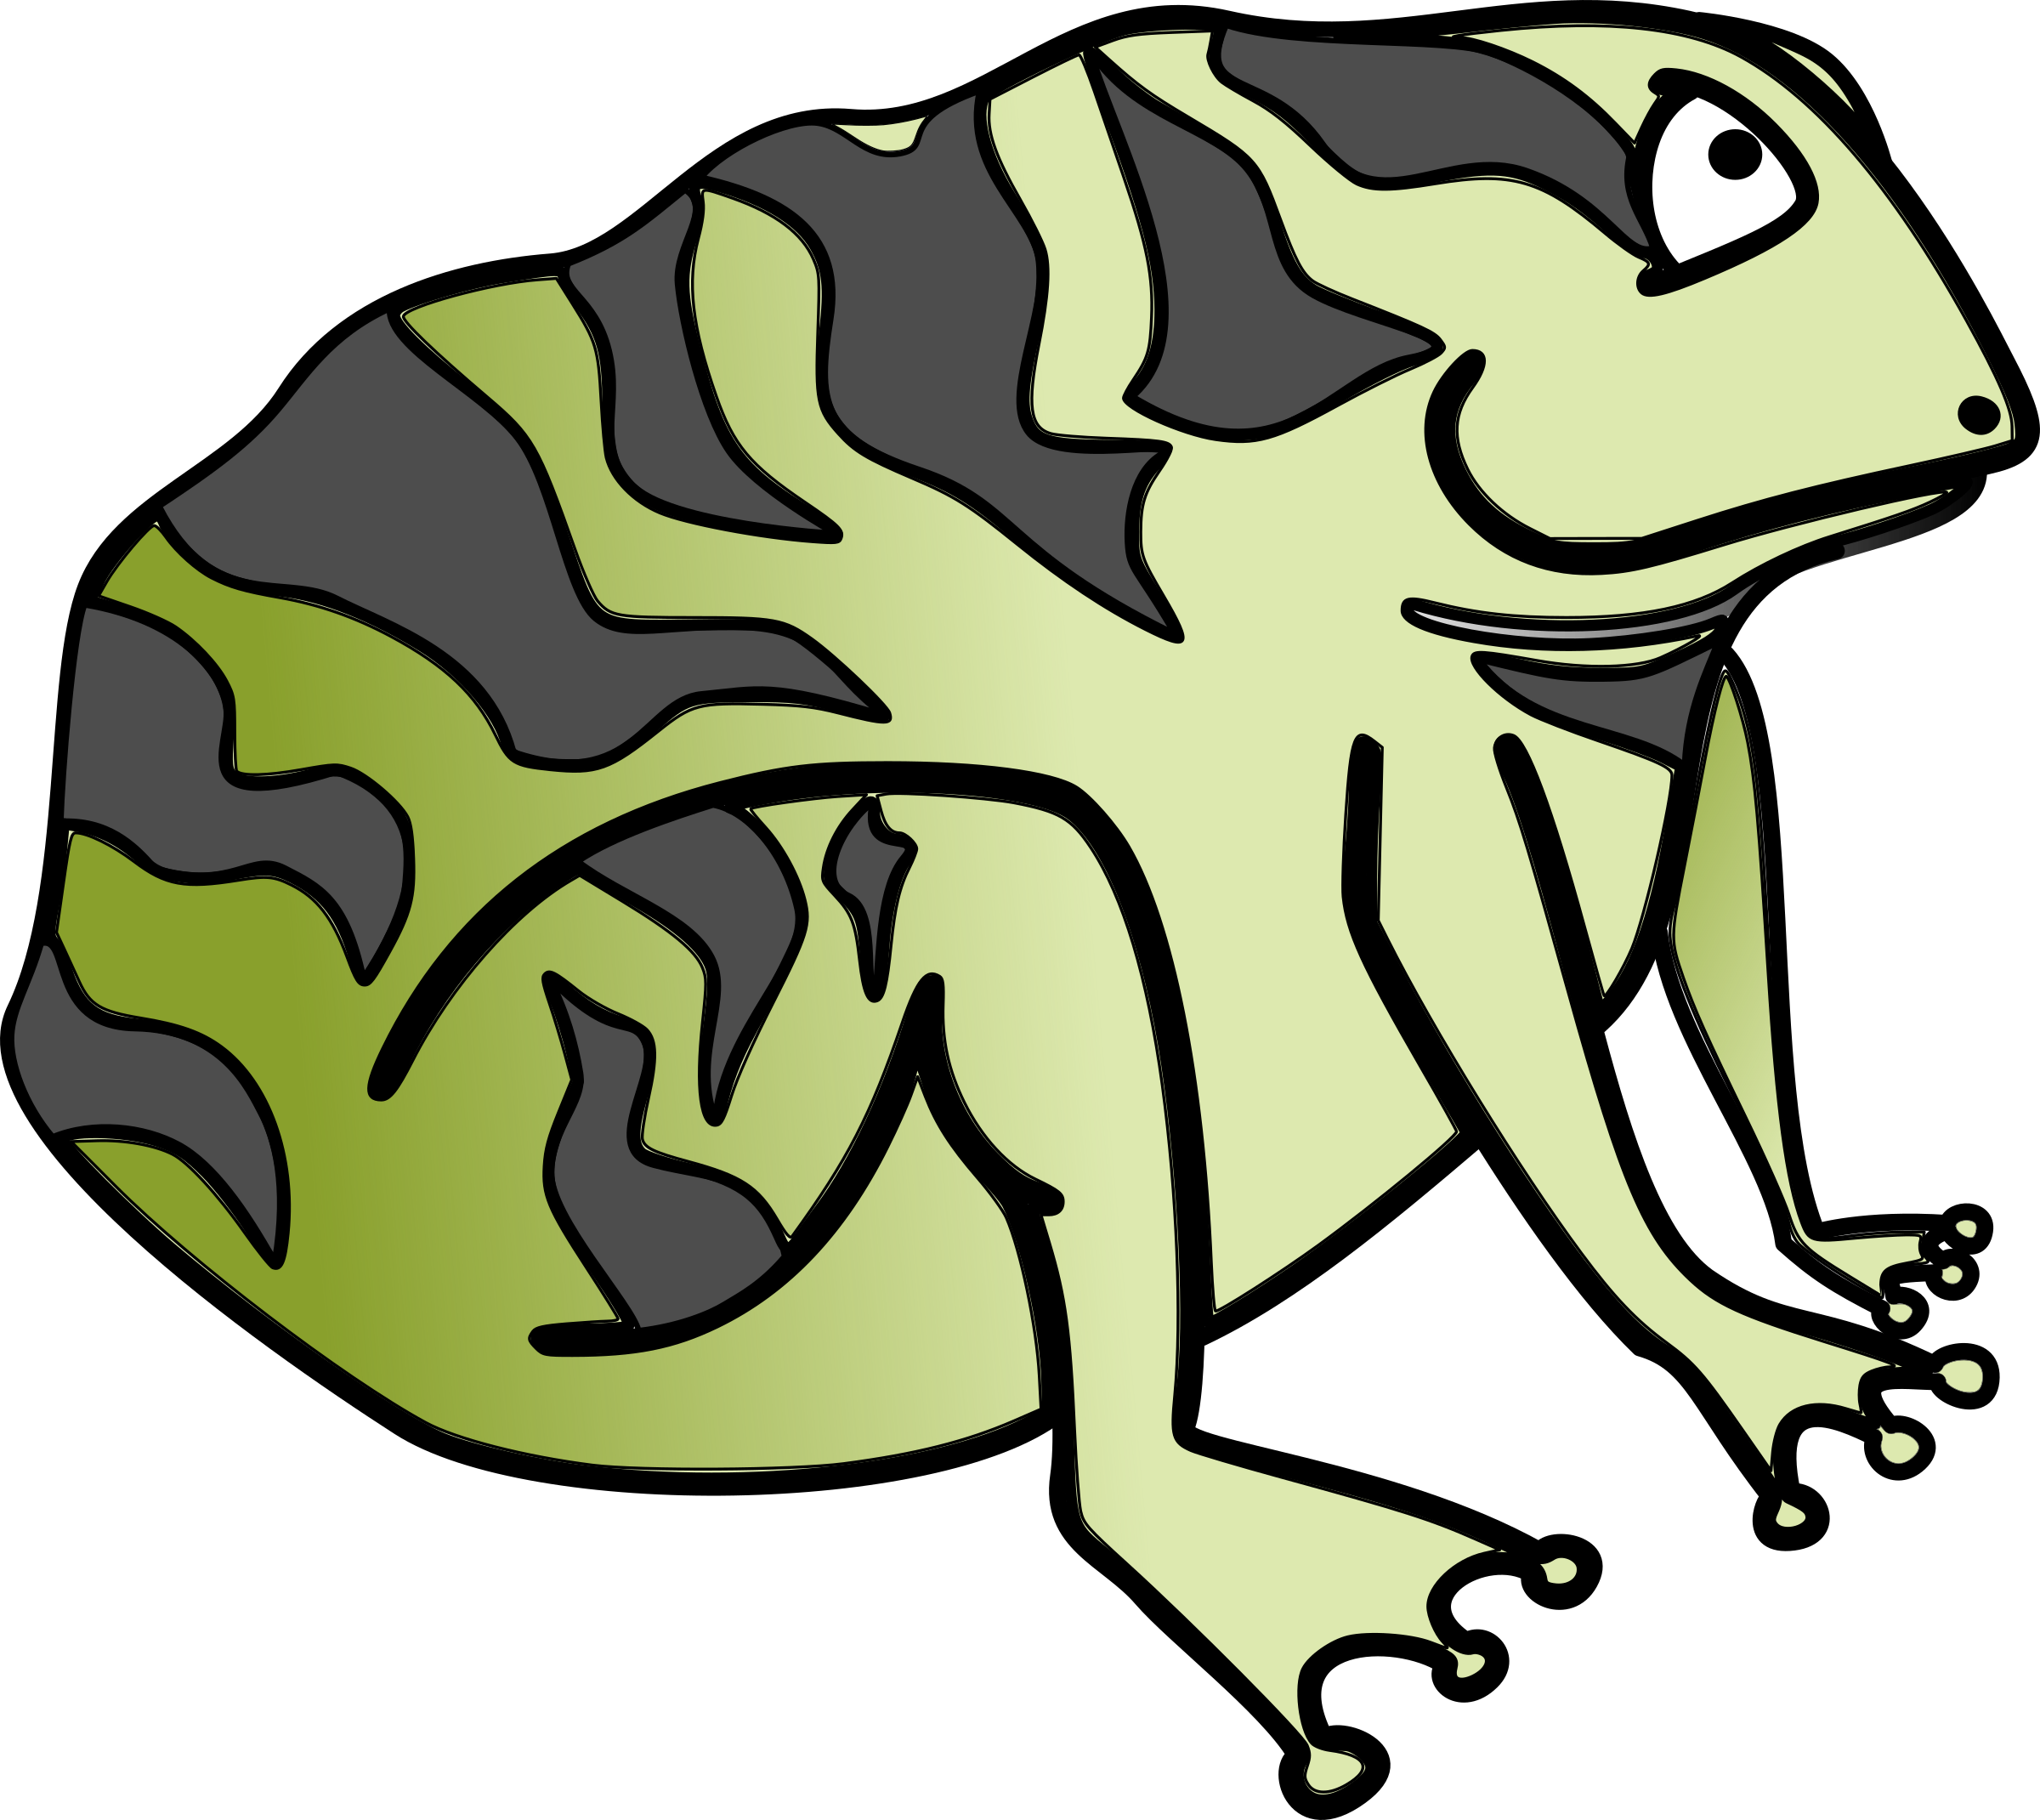 Cane Toad clipart #6, Download drawings